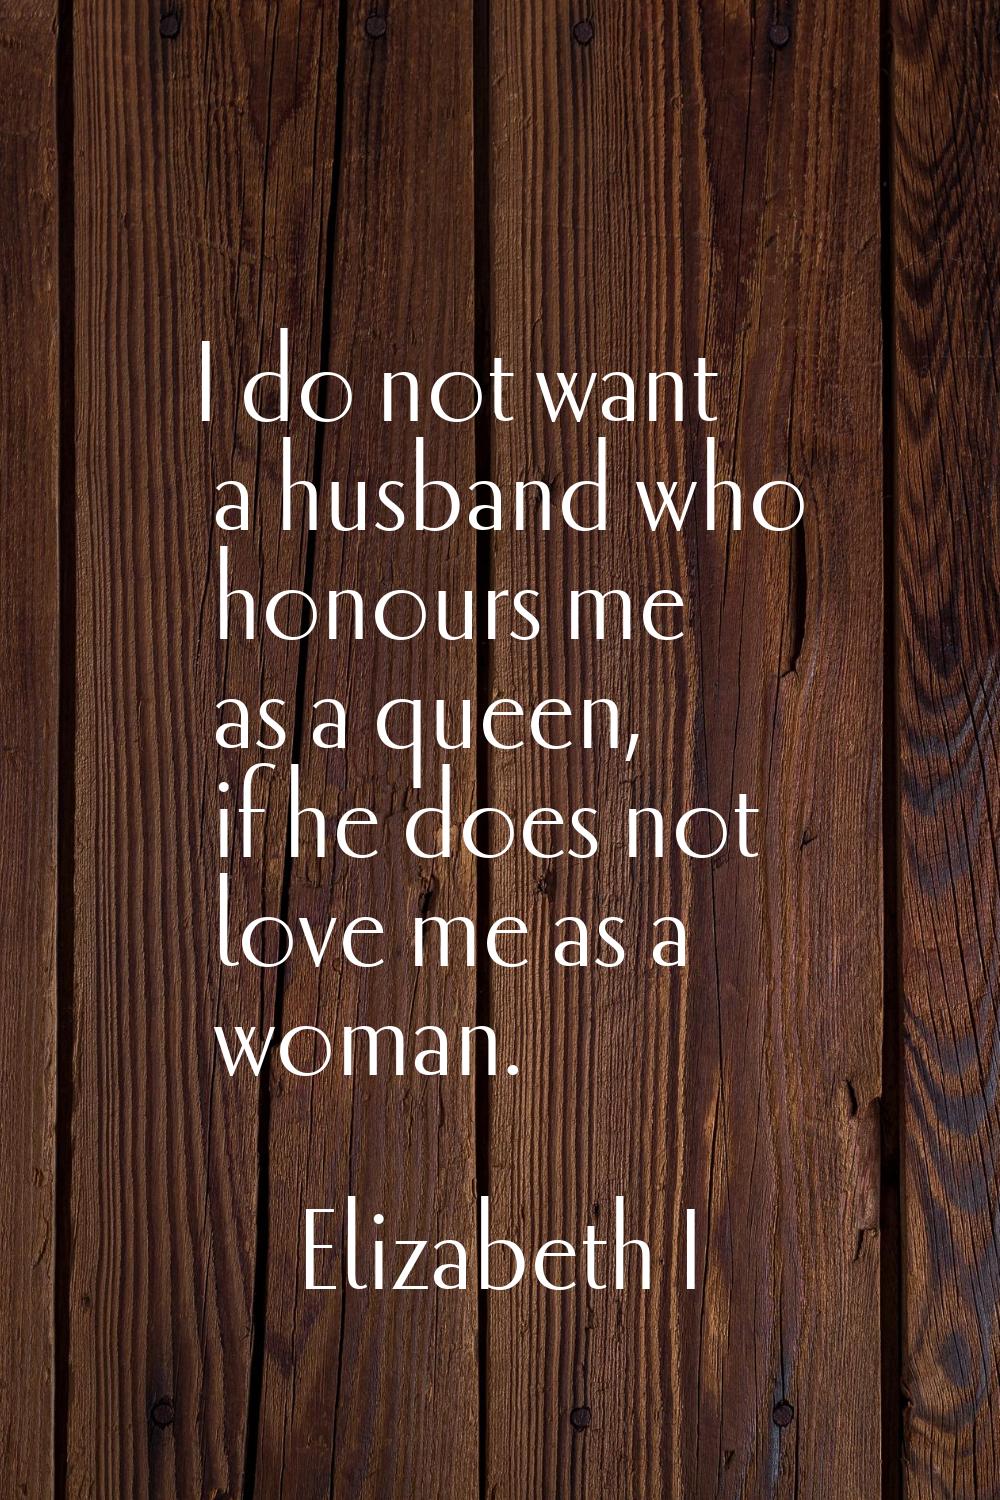 I do not want a husband who honours me as a queen, if he does not love me as a woman.